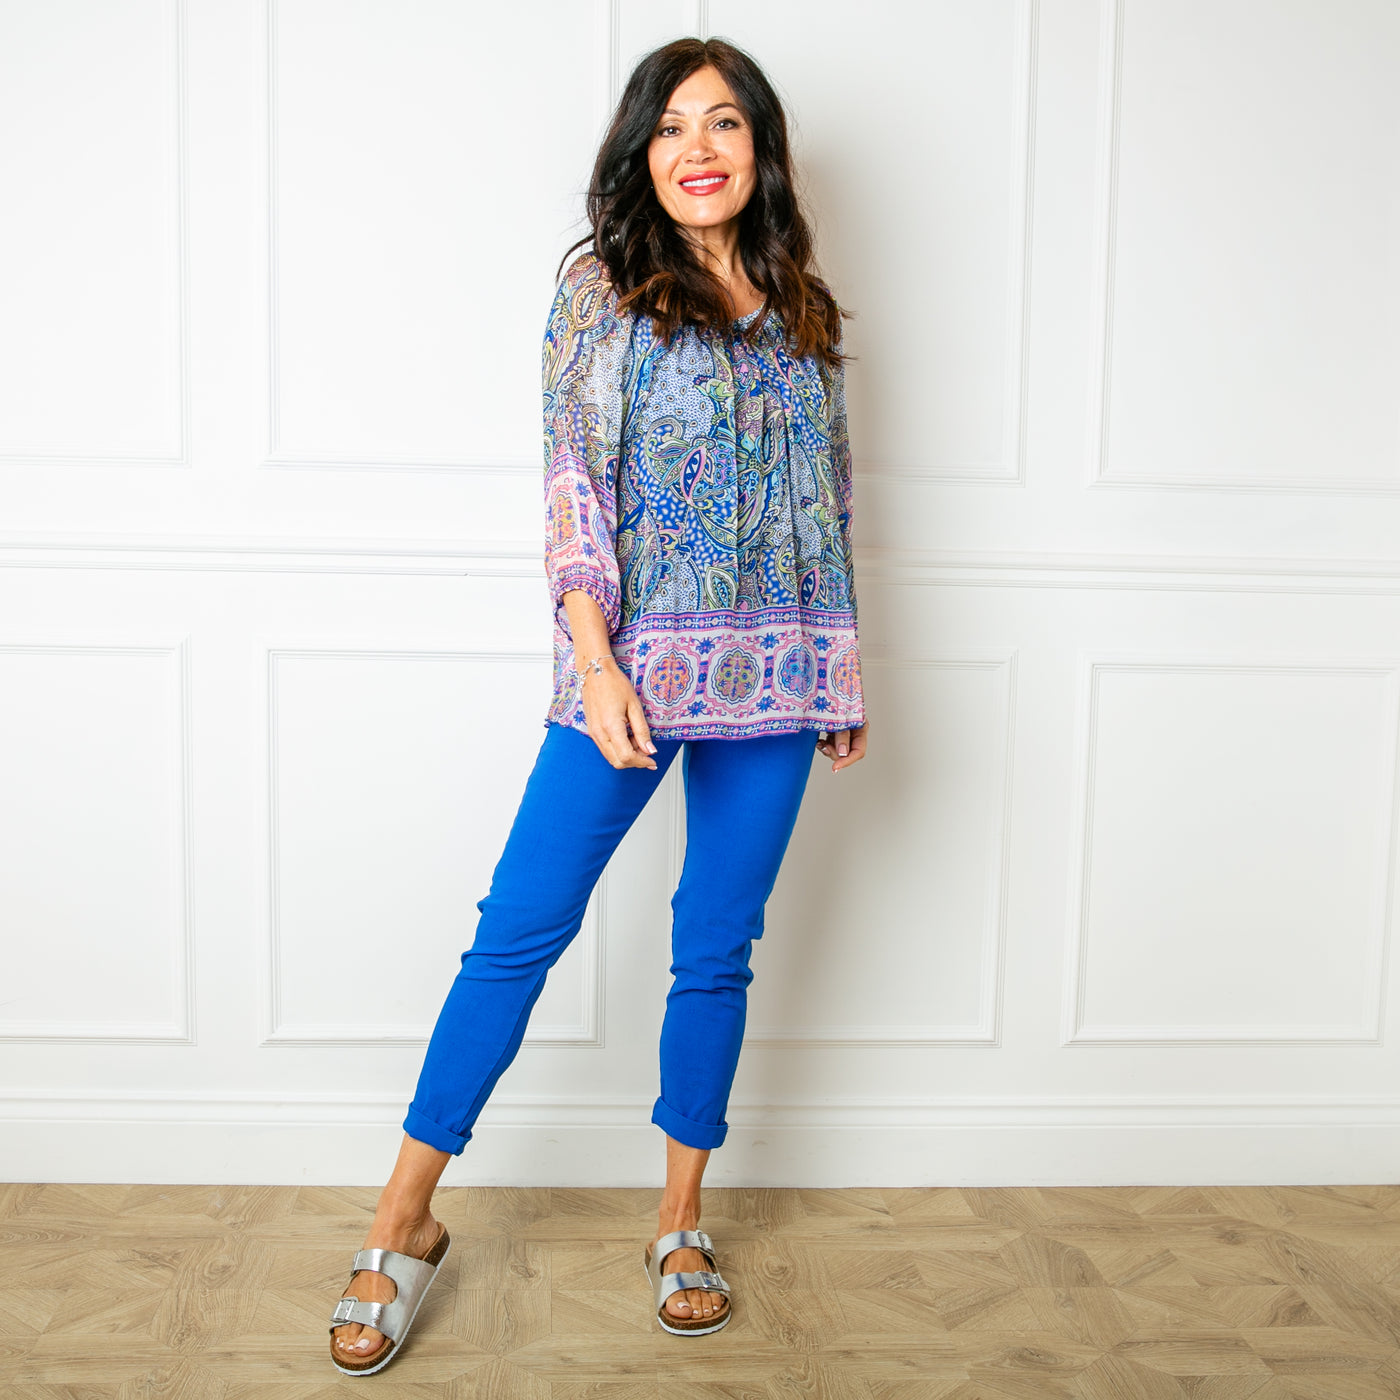 The royal blue Silk Blend Paisley Top with a round neckline with elastic and gathering around the neckline